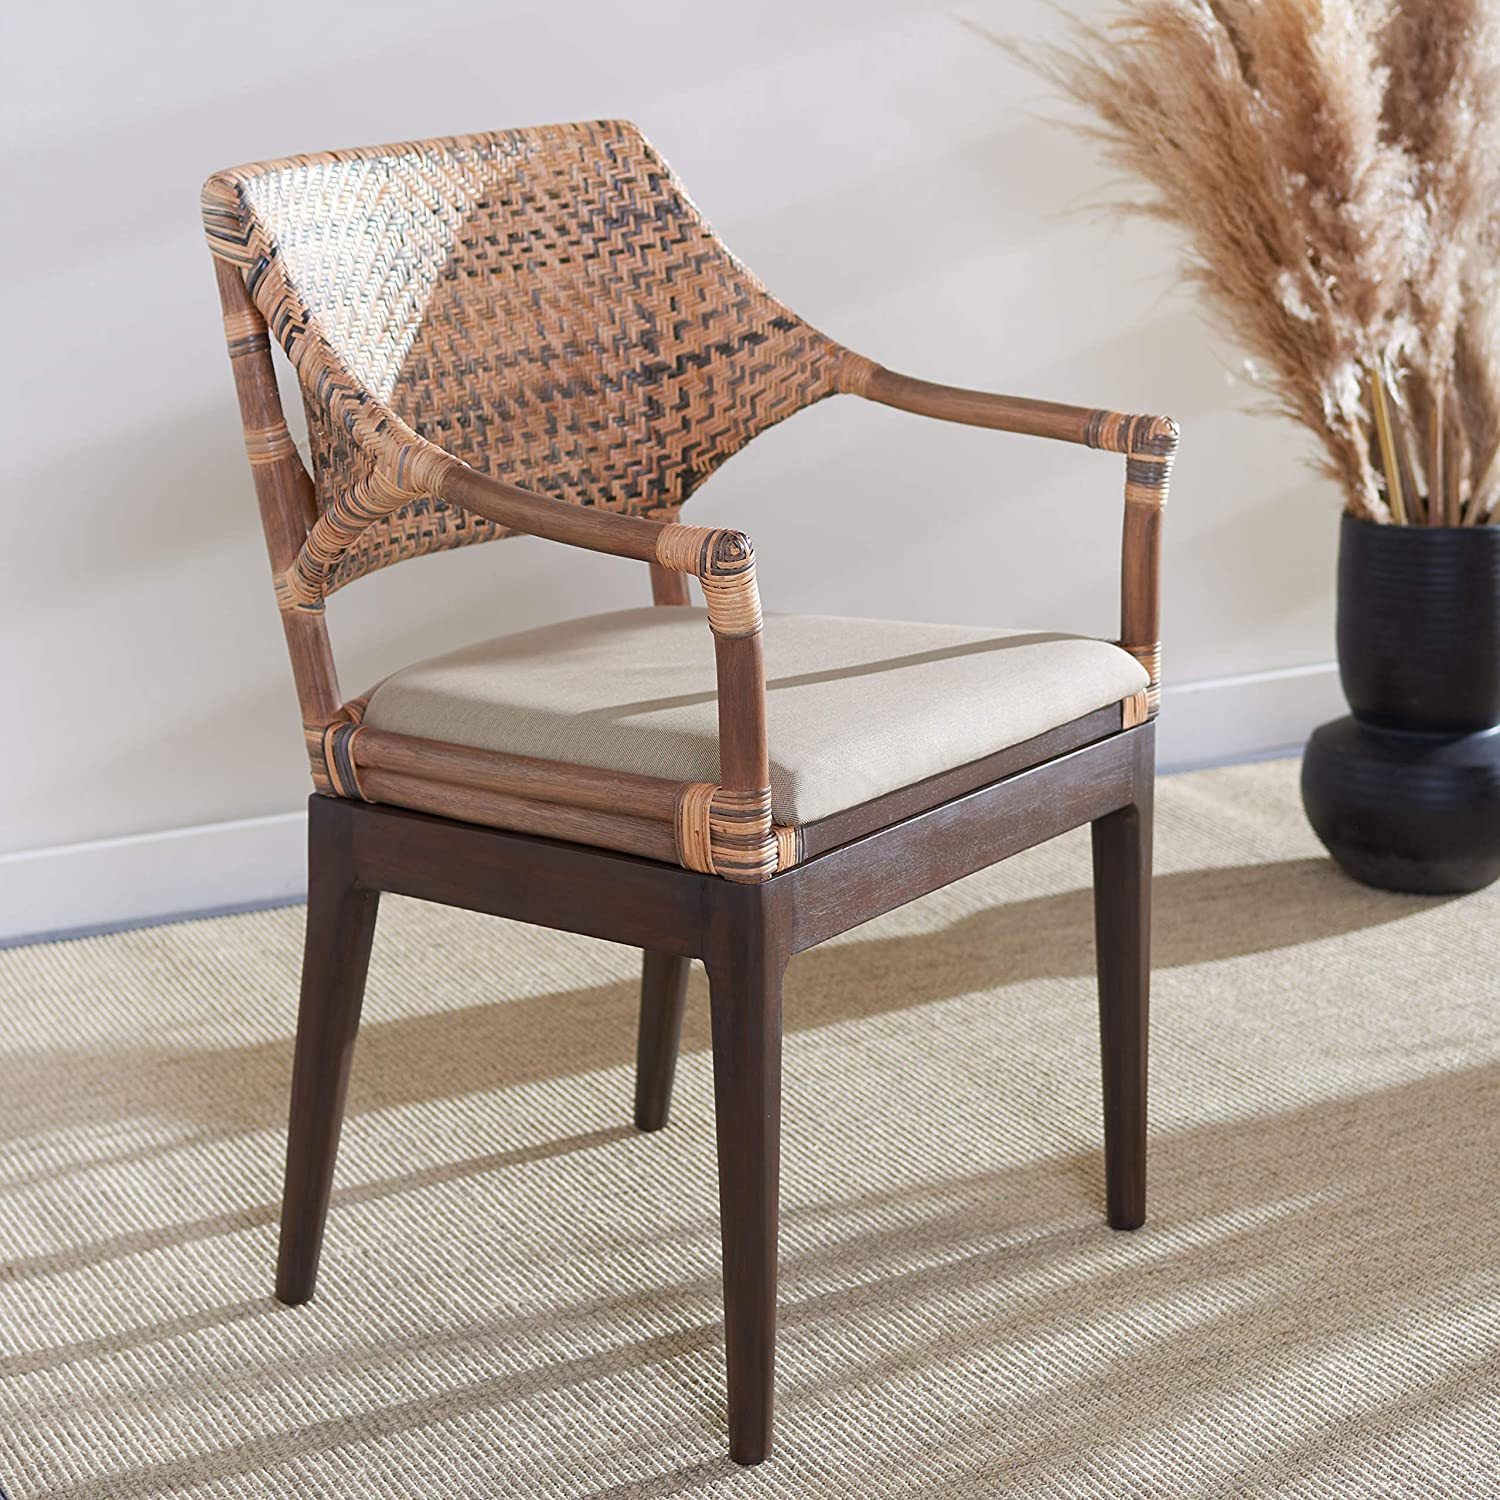 Primary image for Carlo Arm Chair, Honey, From The Safavieh Home Collection.